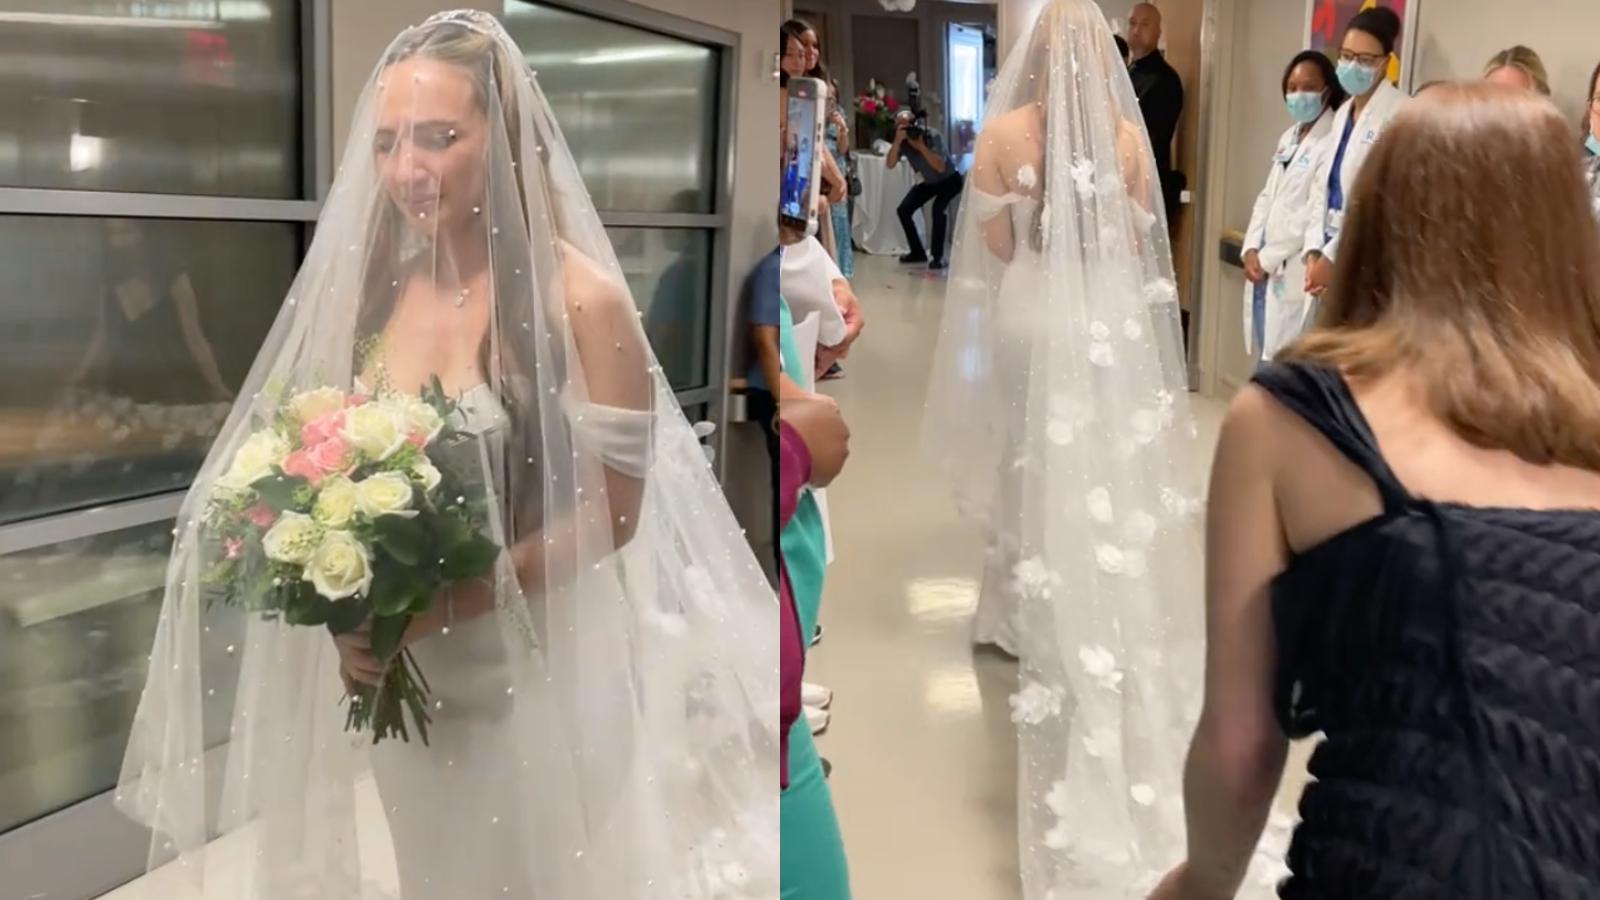 Woman gets married at hospital